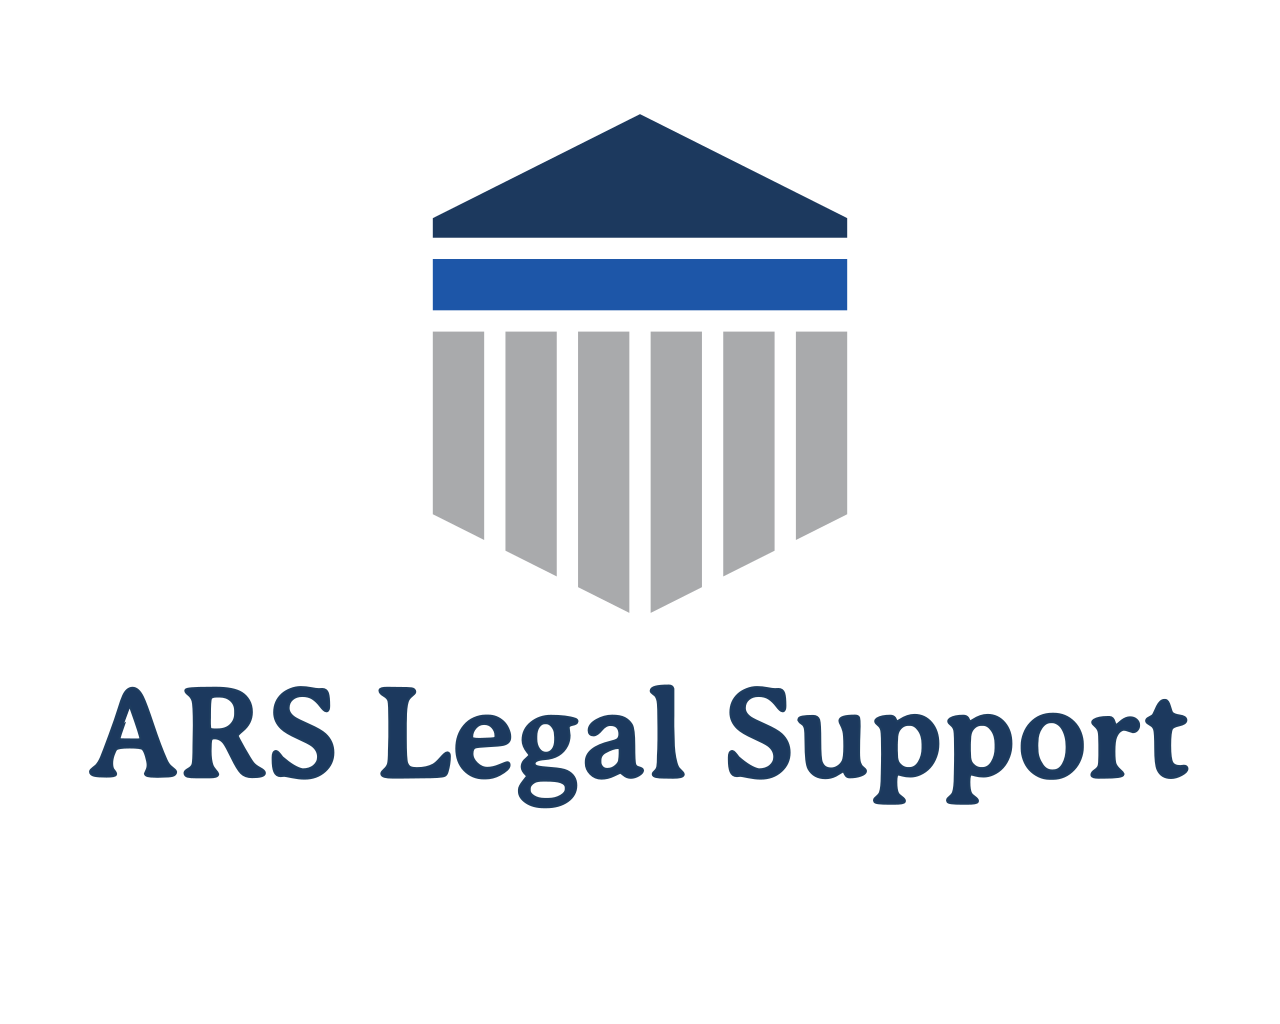 ARS Legal Support